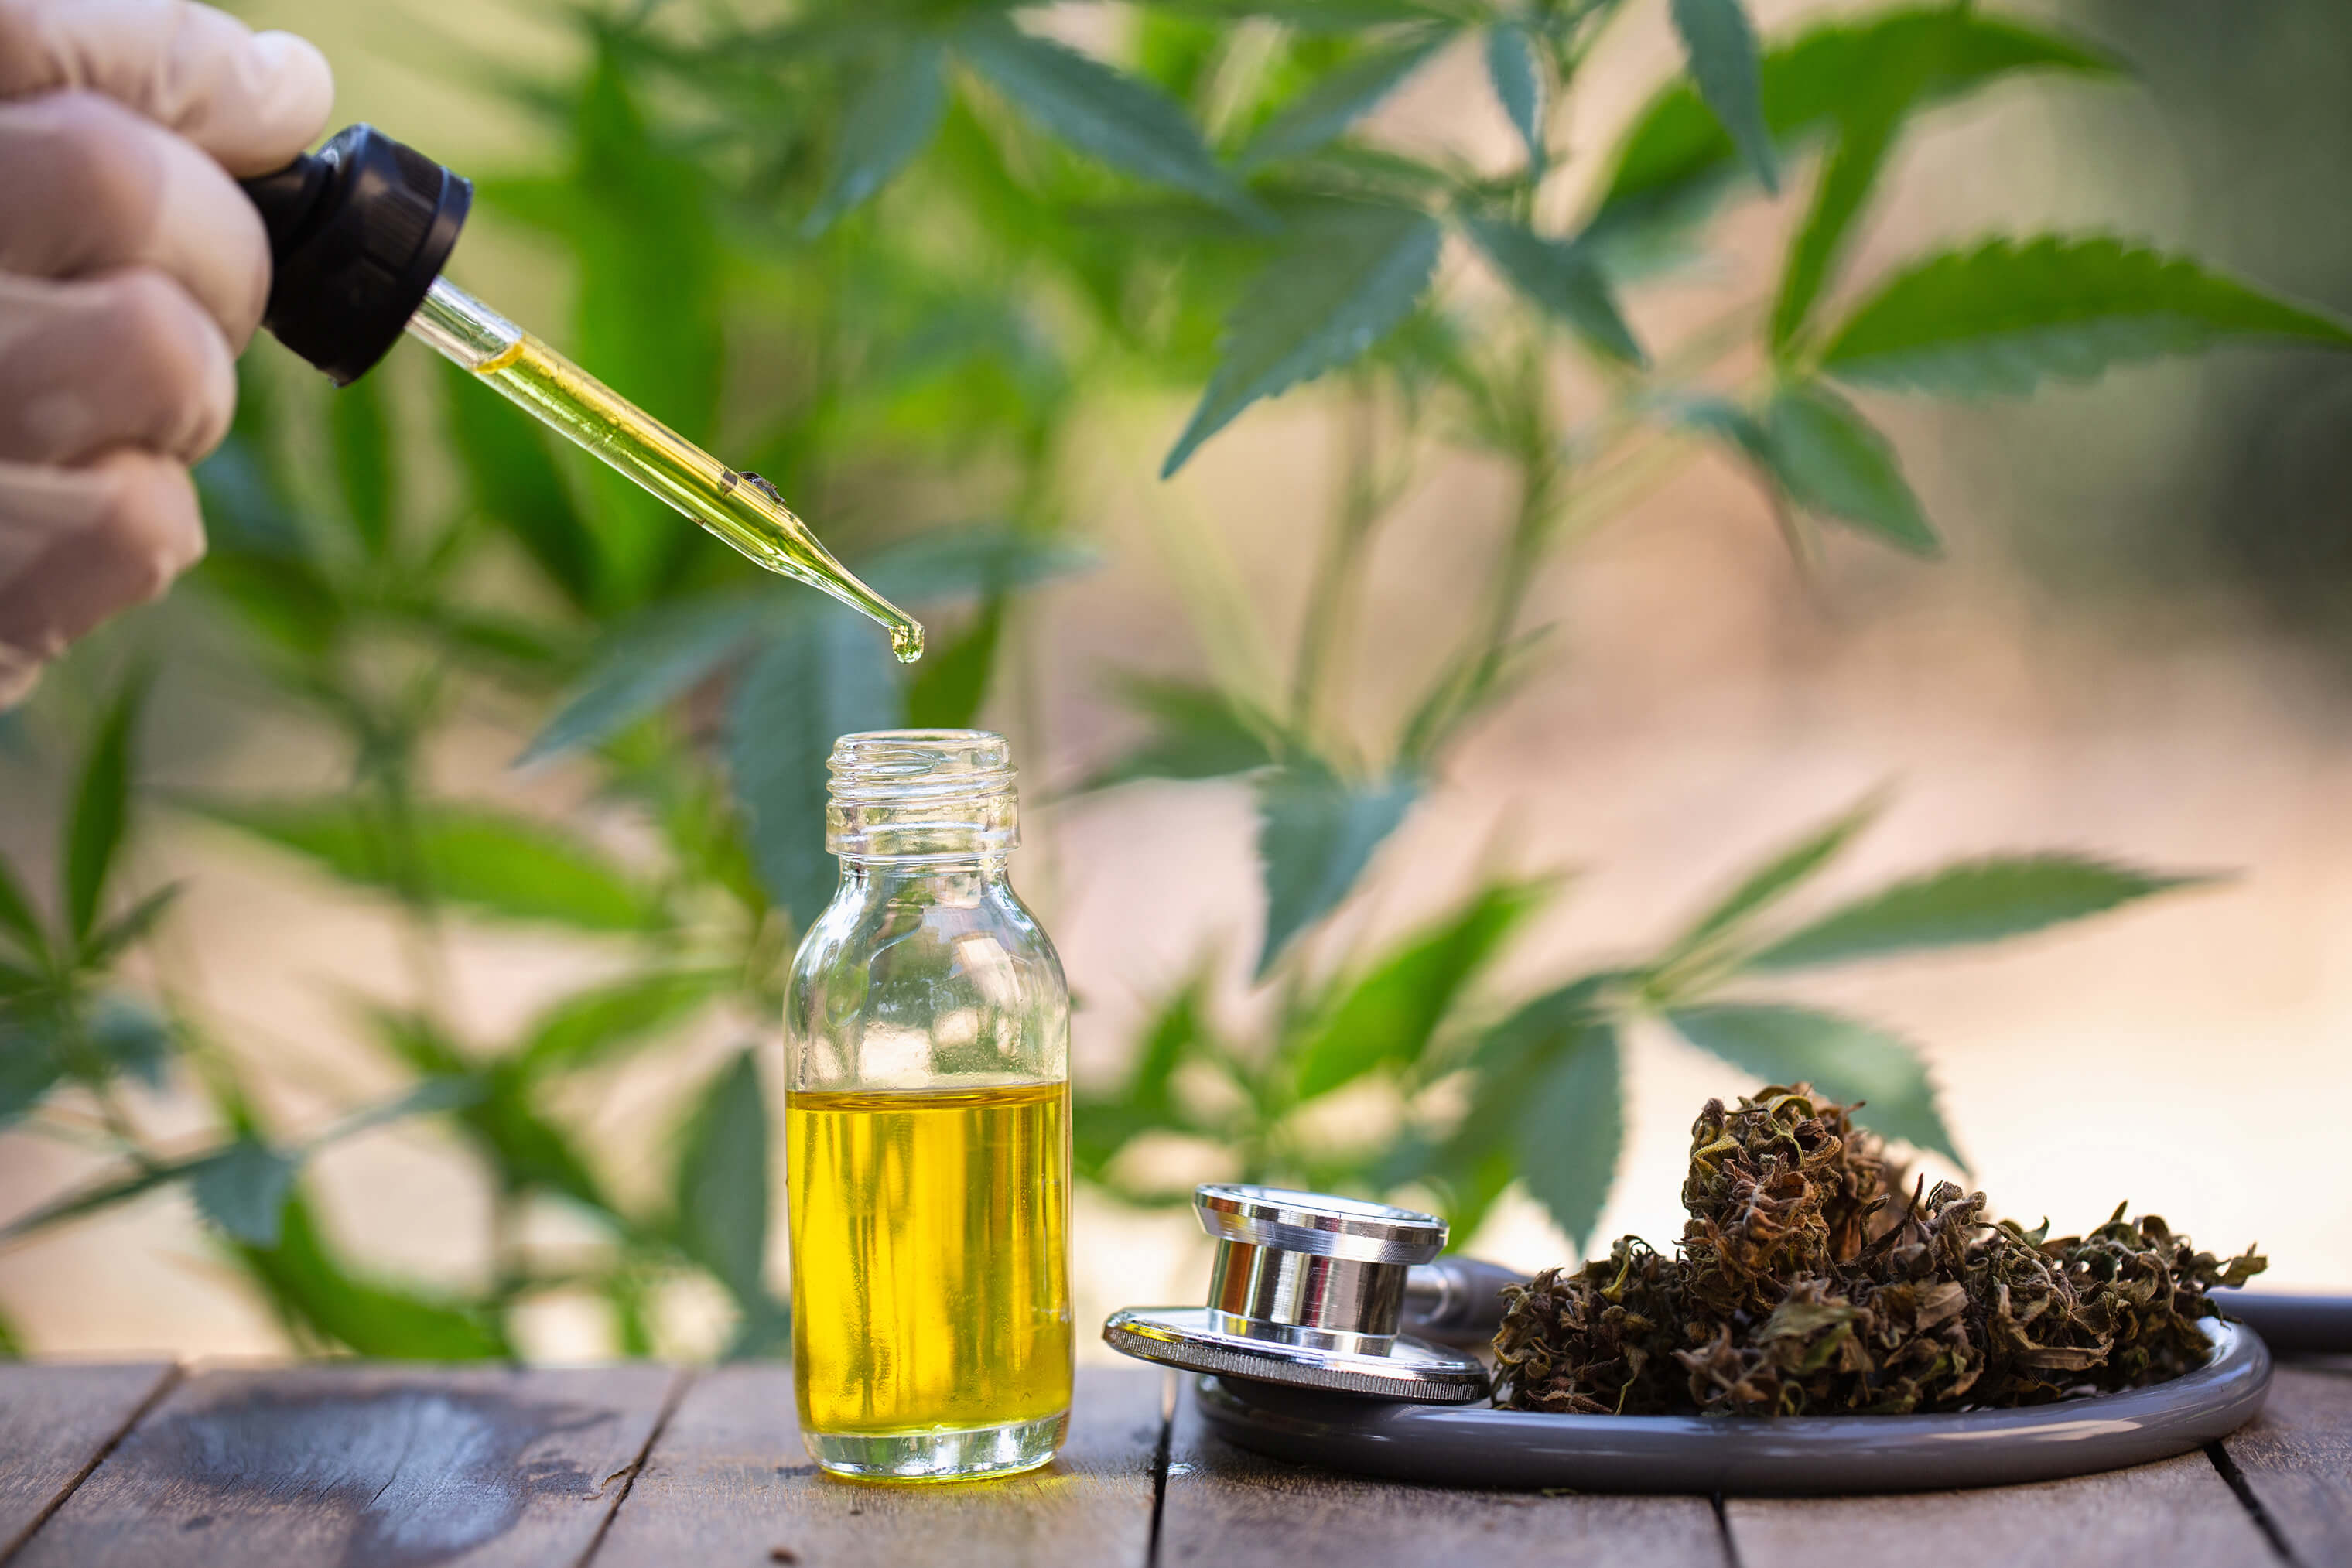 How To Buy The Best CBD Products and What To Look For In A CBD Company